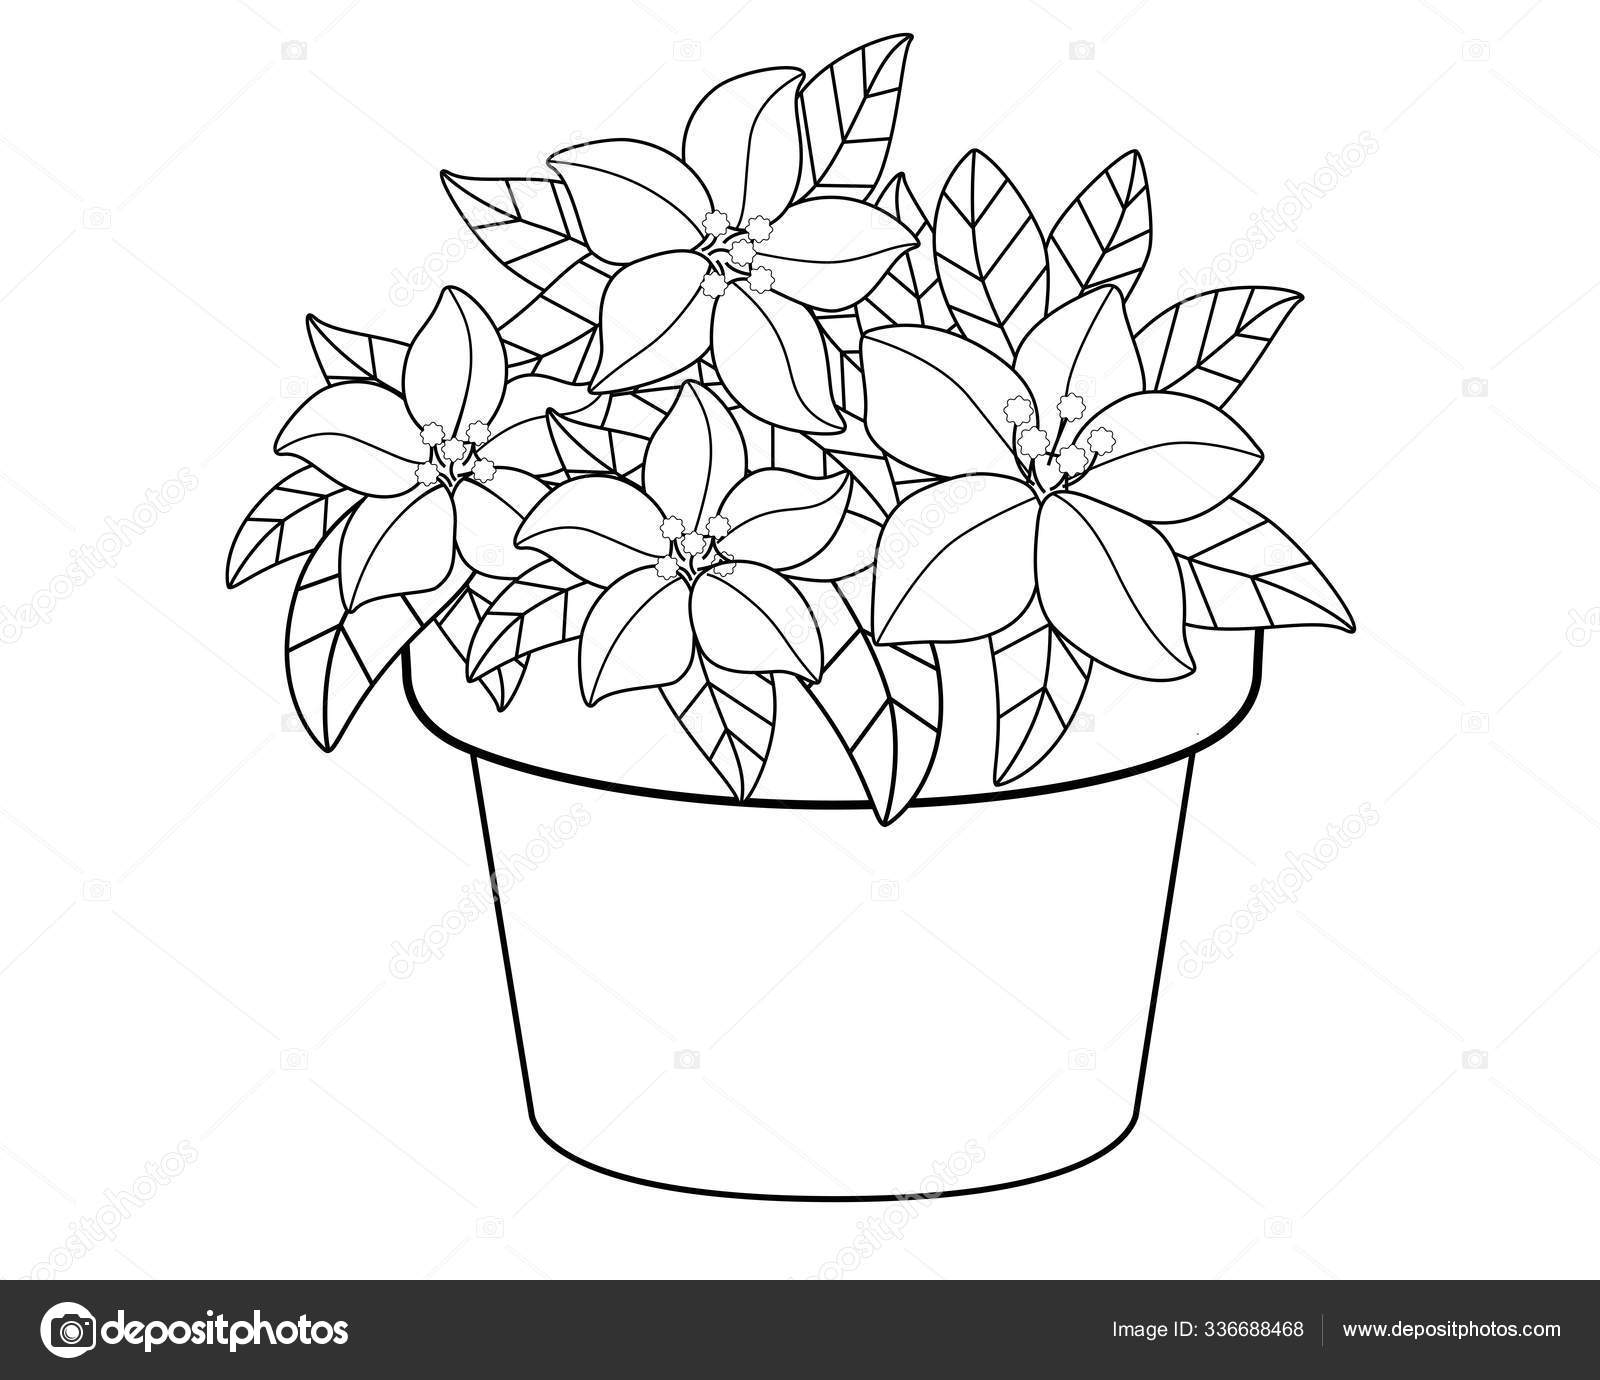 Flower Pot Colouring Page | Free Colouring Book for Children – Monkey Pen  Store